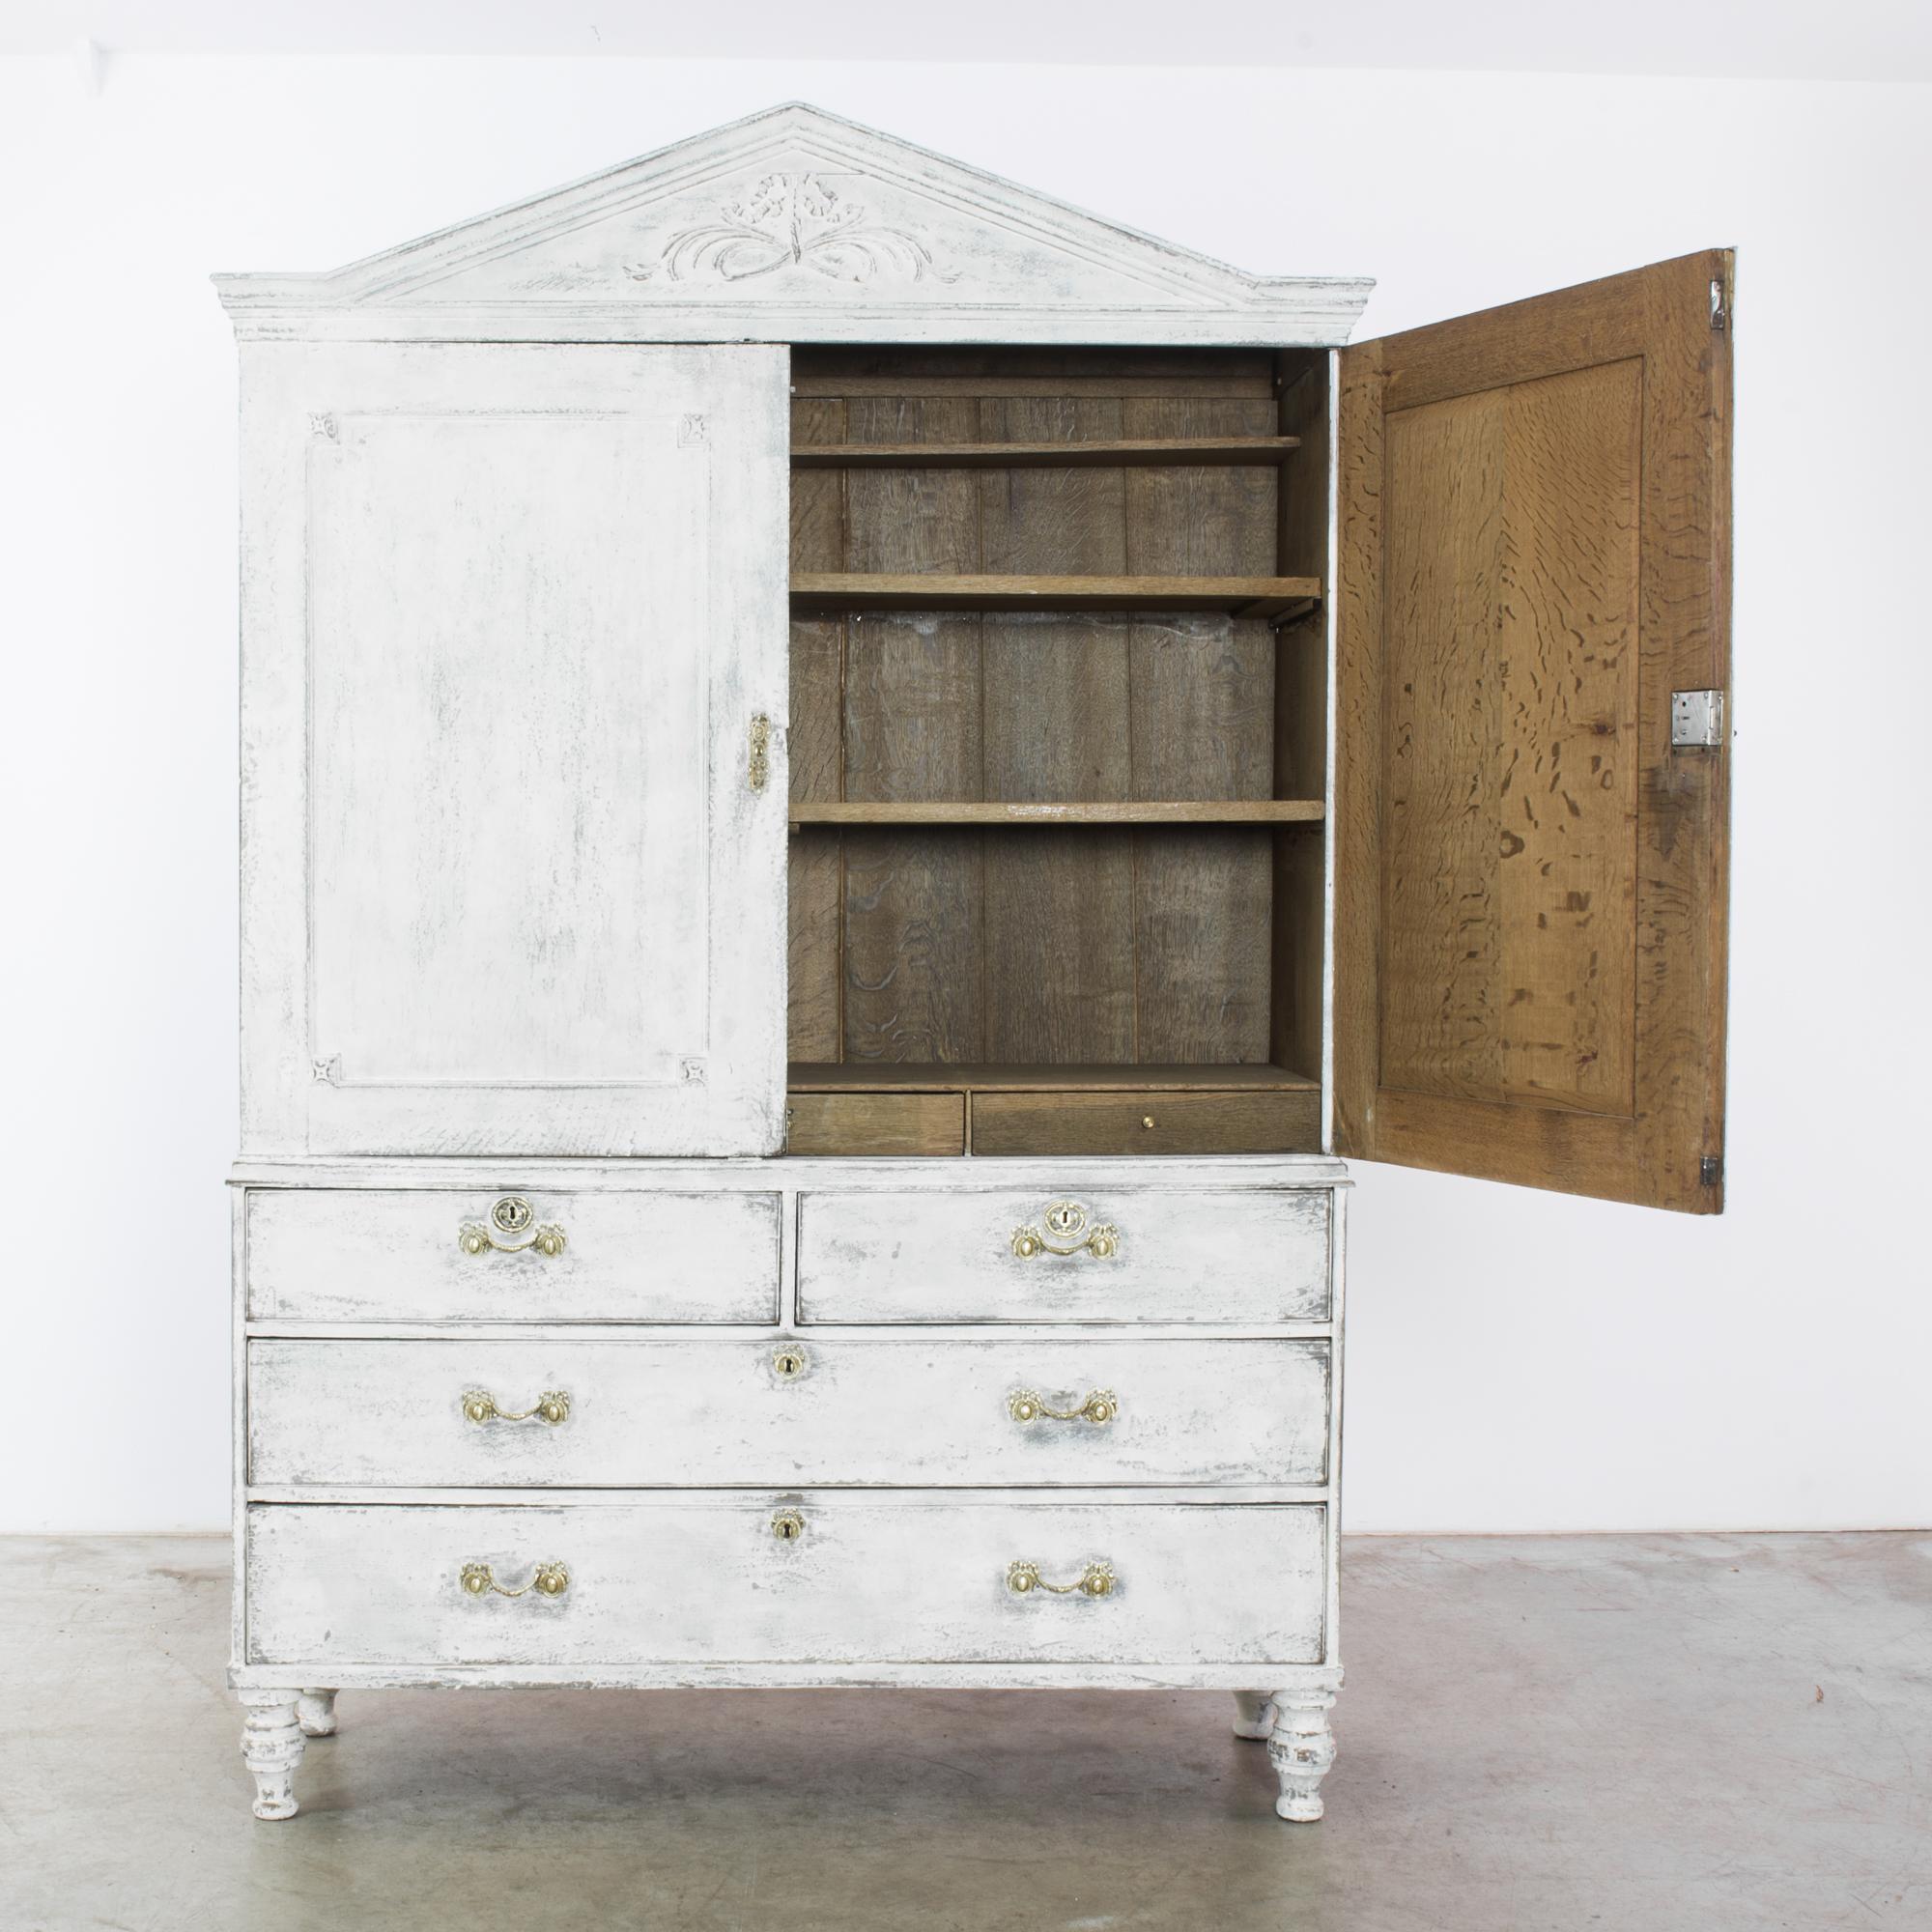 This two-part eighteenth century wooden armoire with shelves resting on a chest of drawers was made in Belgium. Its peaked top and delicate ornamentation evoke a sense of romanticism. The decorative pulls and locks, paneling details, and carved